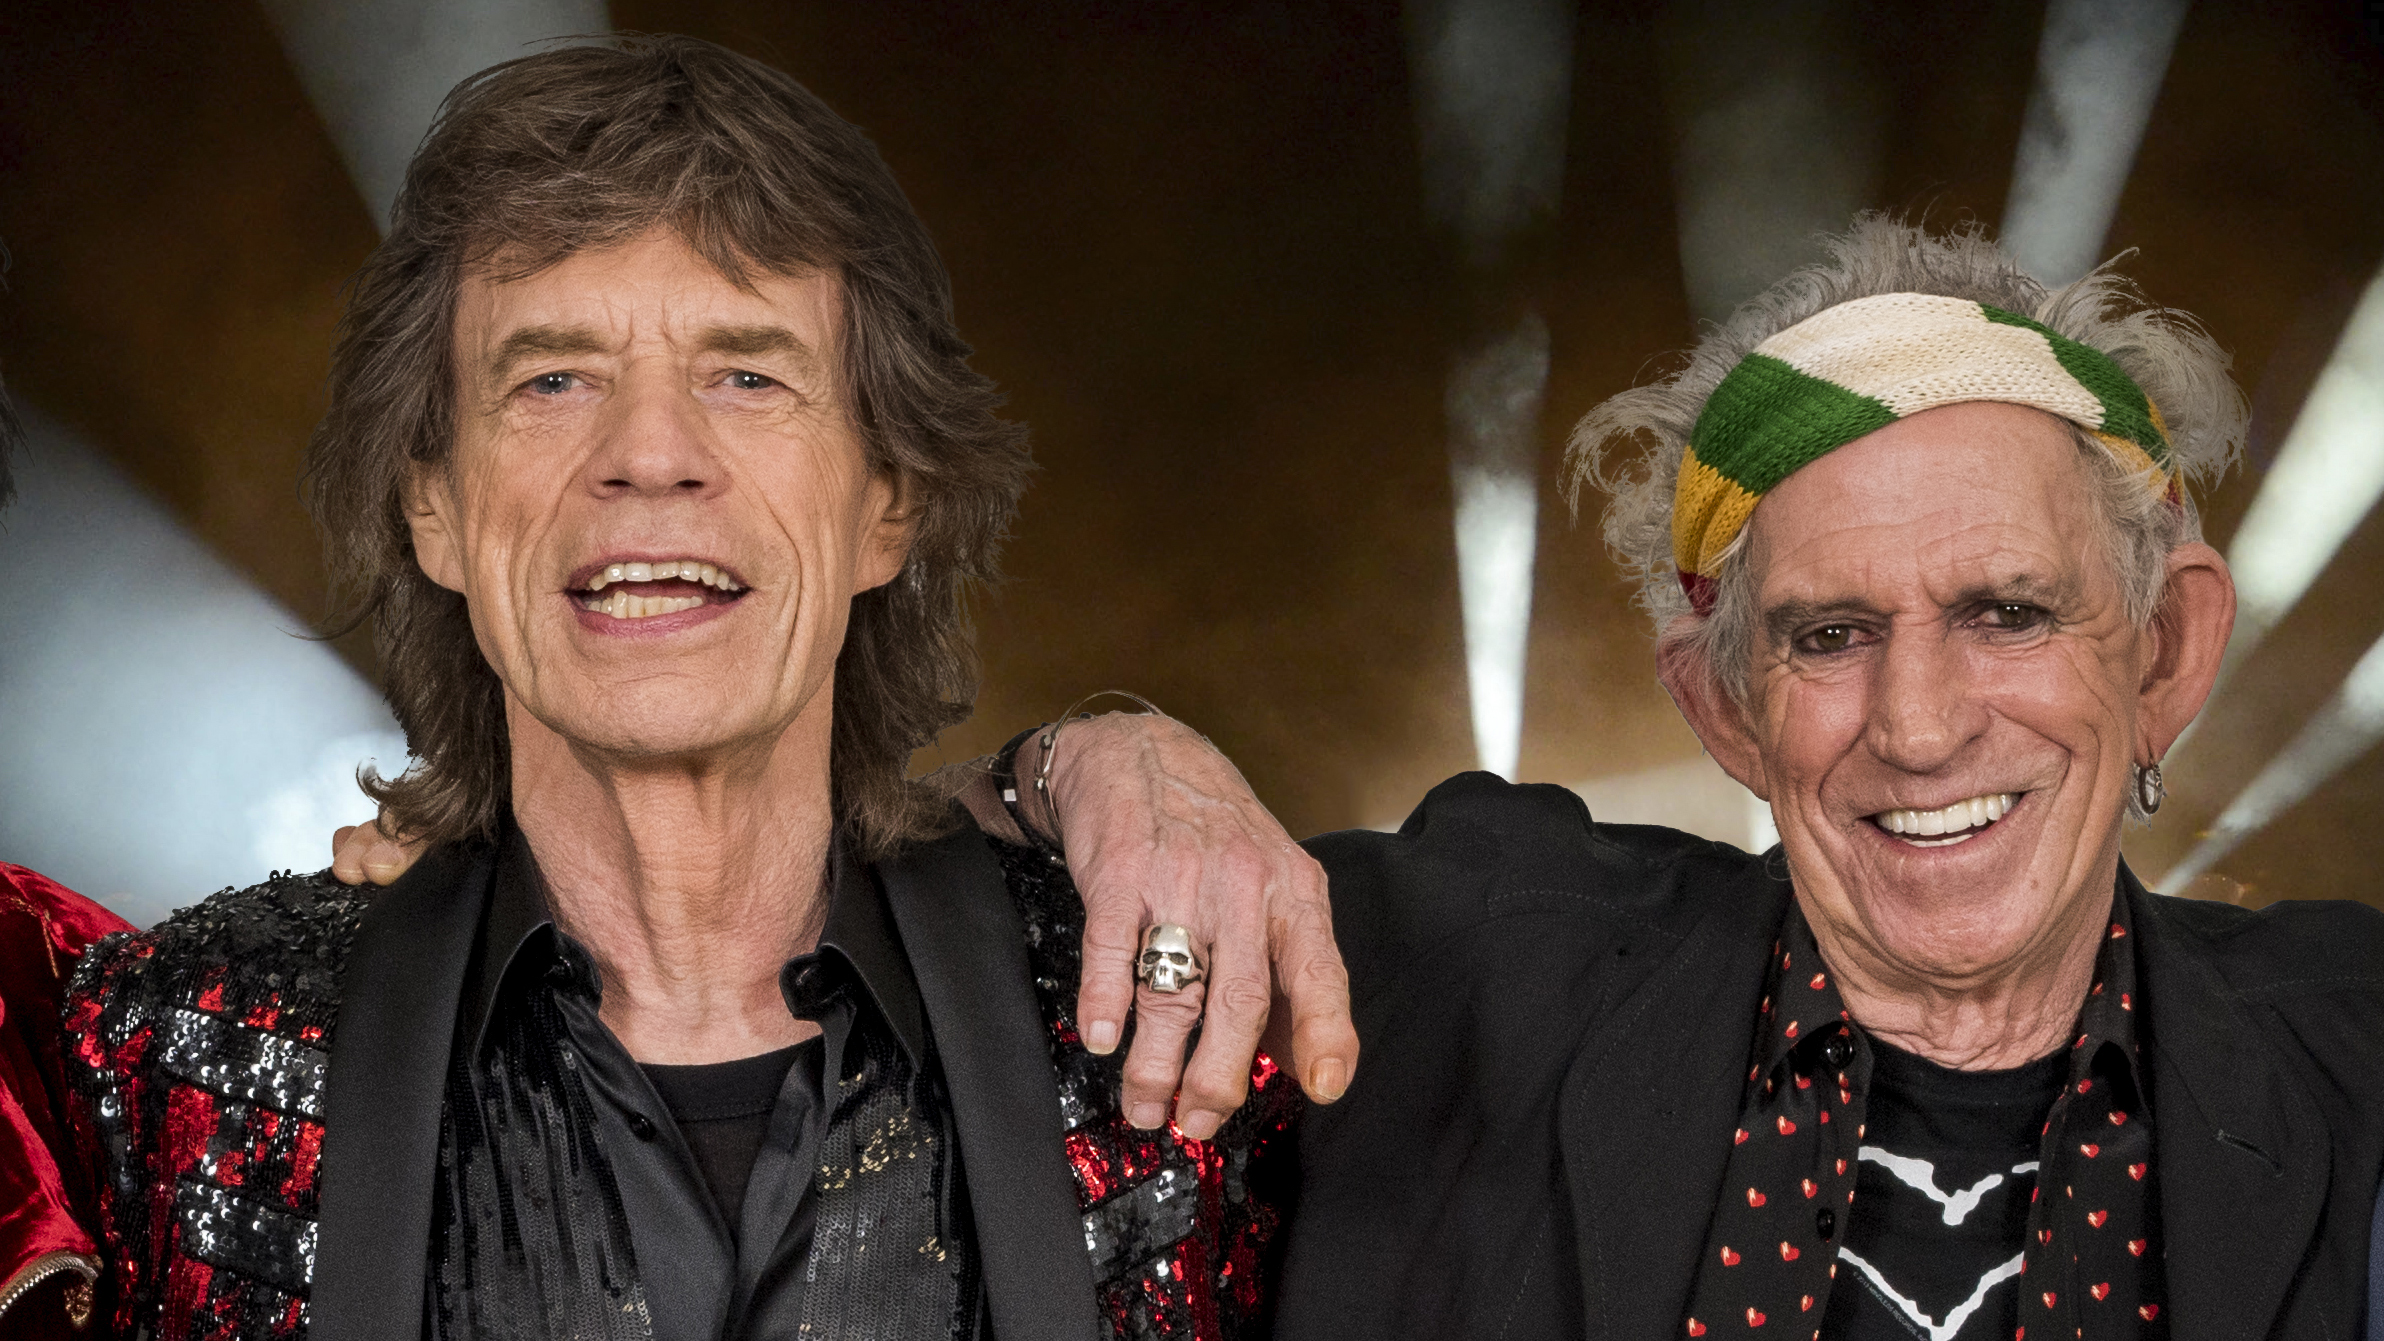 Keith Richards Apologizes For Slamming Mick Jagger For Having A Baby At Age 73